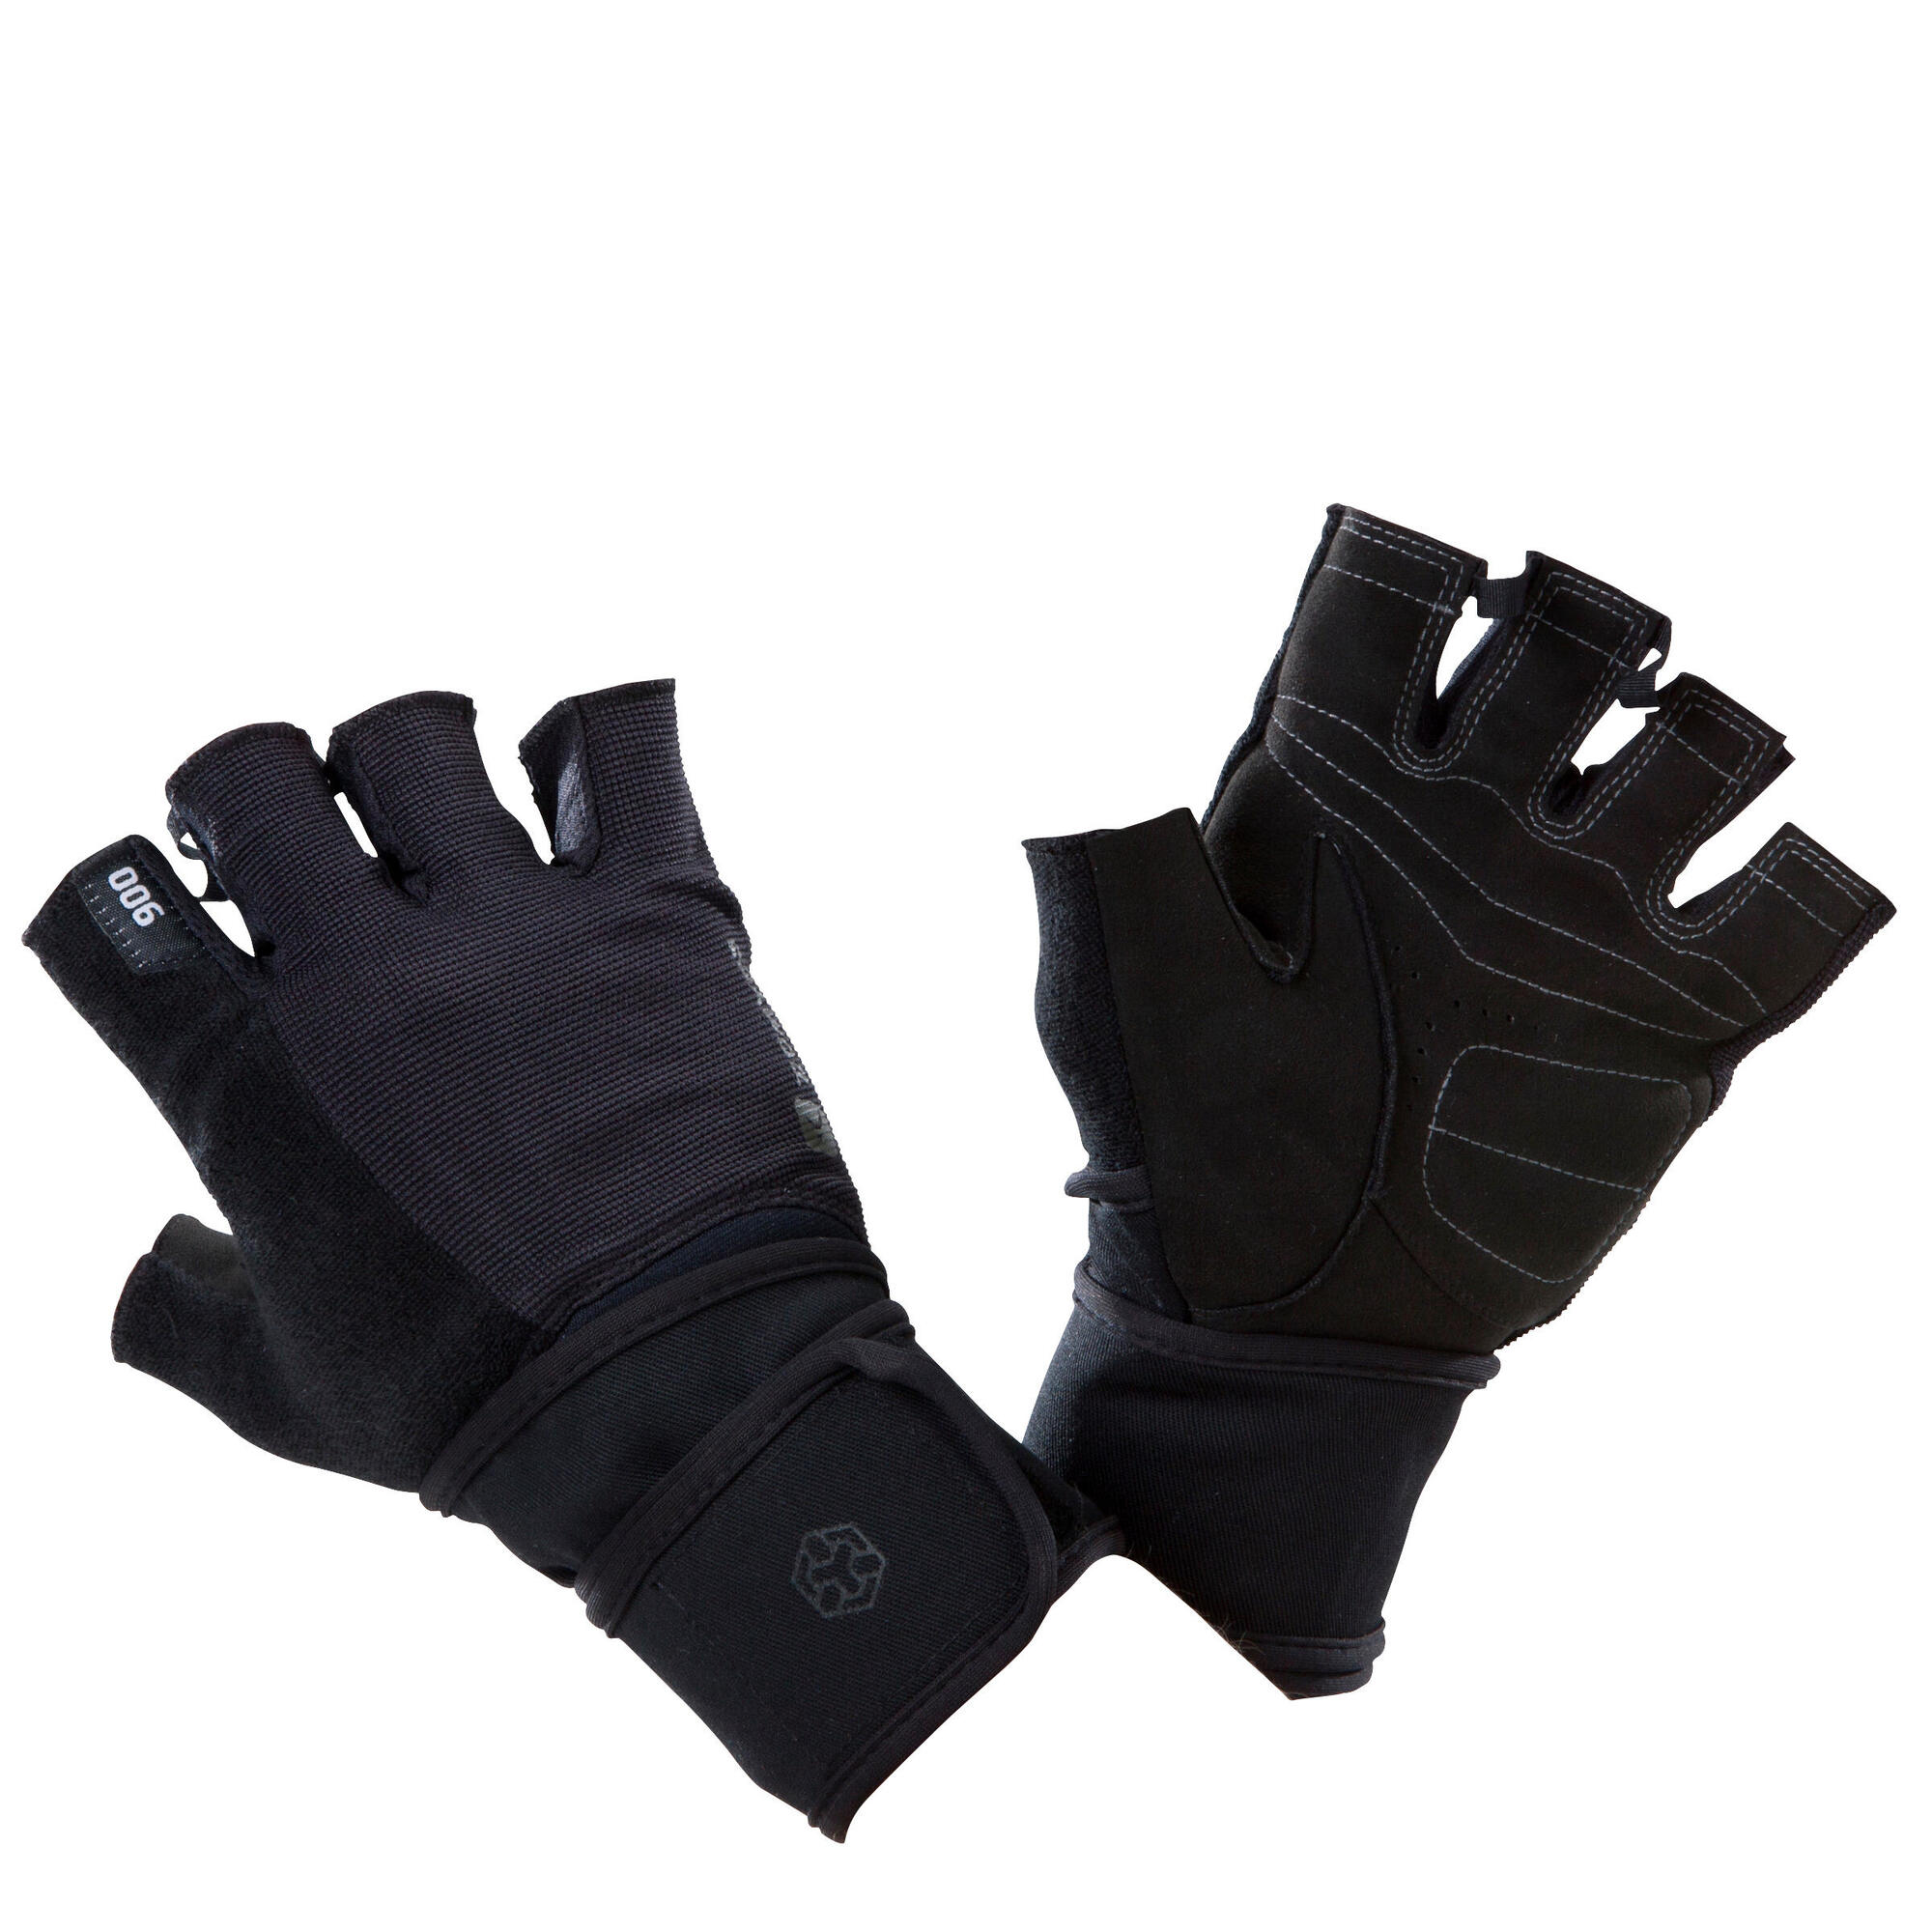 900 Weight Training Glove with Double Rip-Tab Cuff - Black/Grey ...